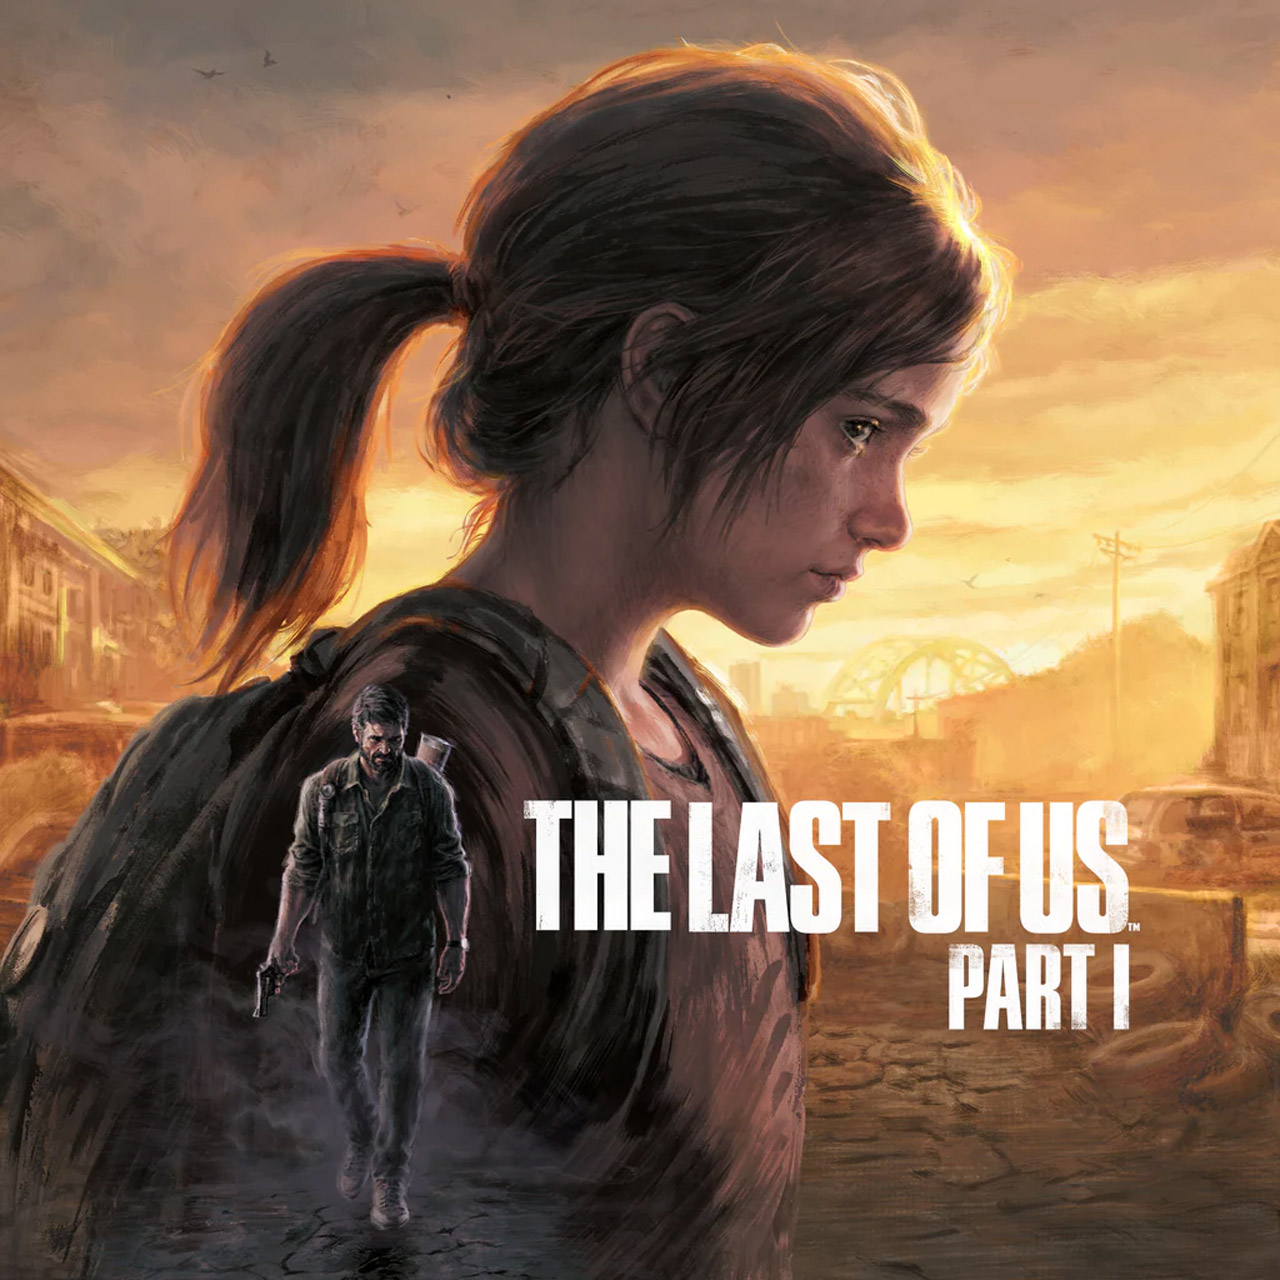 The Last of Us Part I pc org 11 - خرید بازی اورجینال The Last of Us Part I برای PC